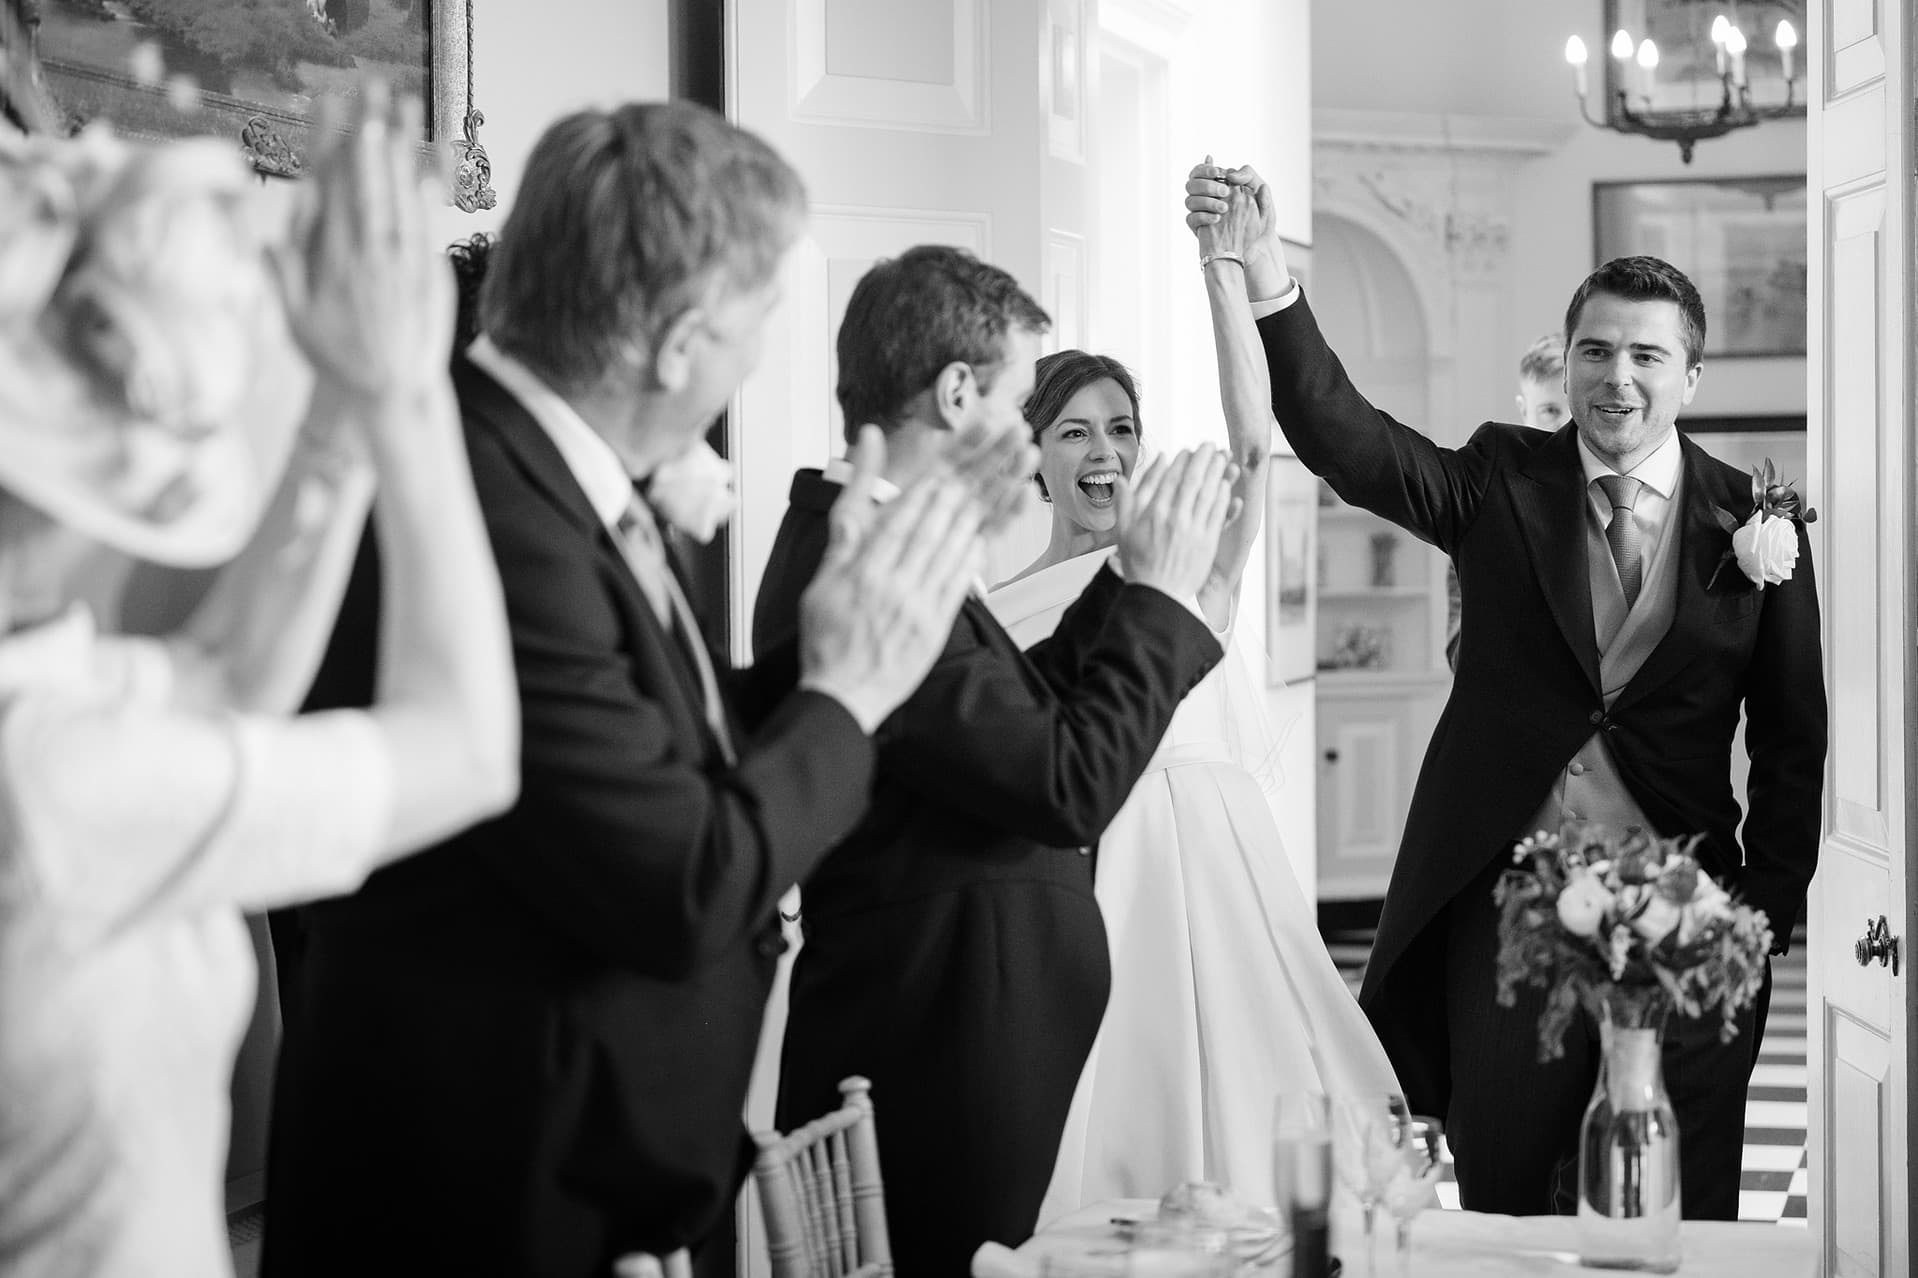 The bride and groom's reaction as they're announced into the room for dinner